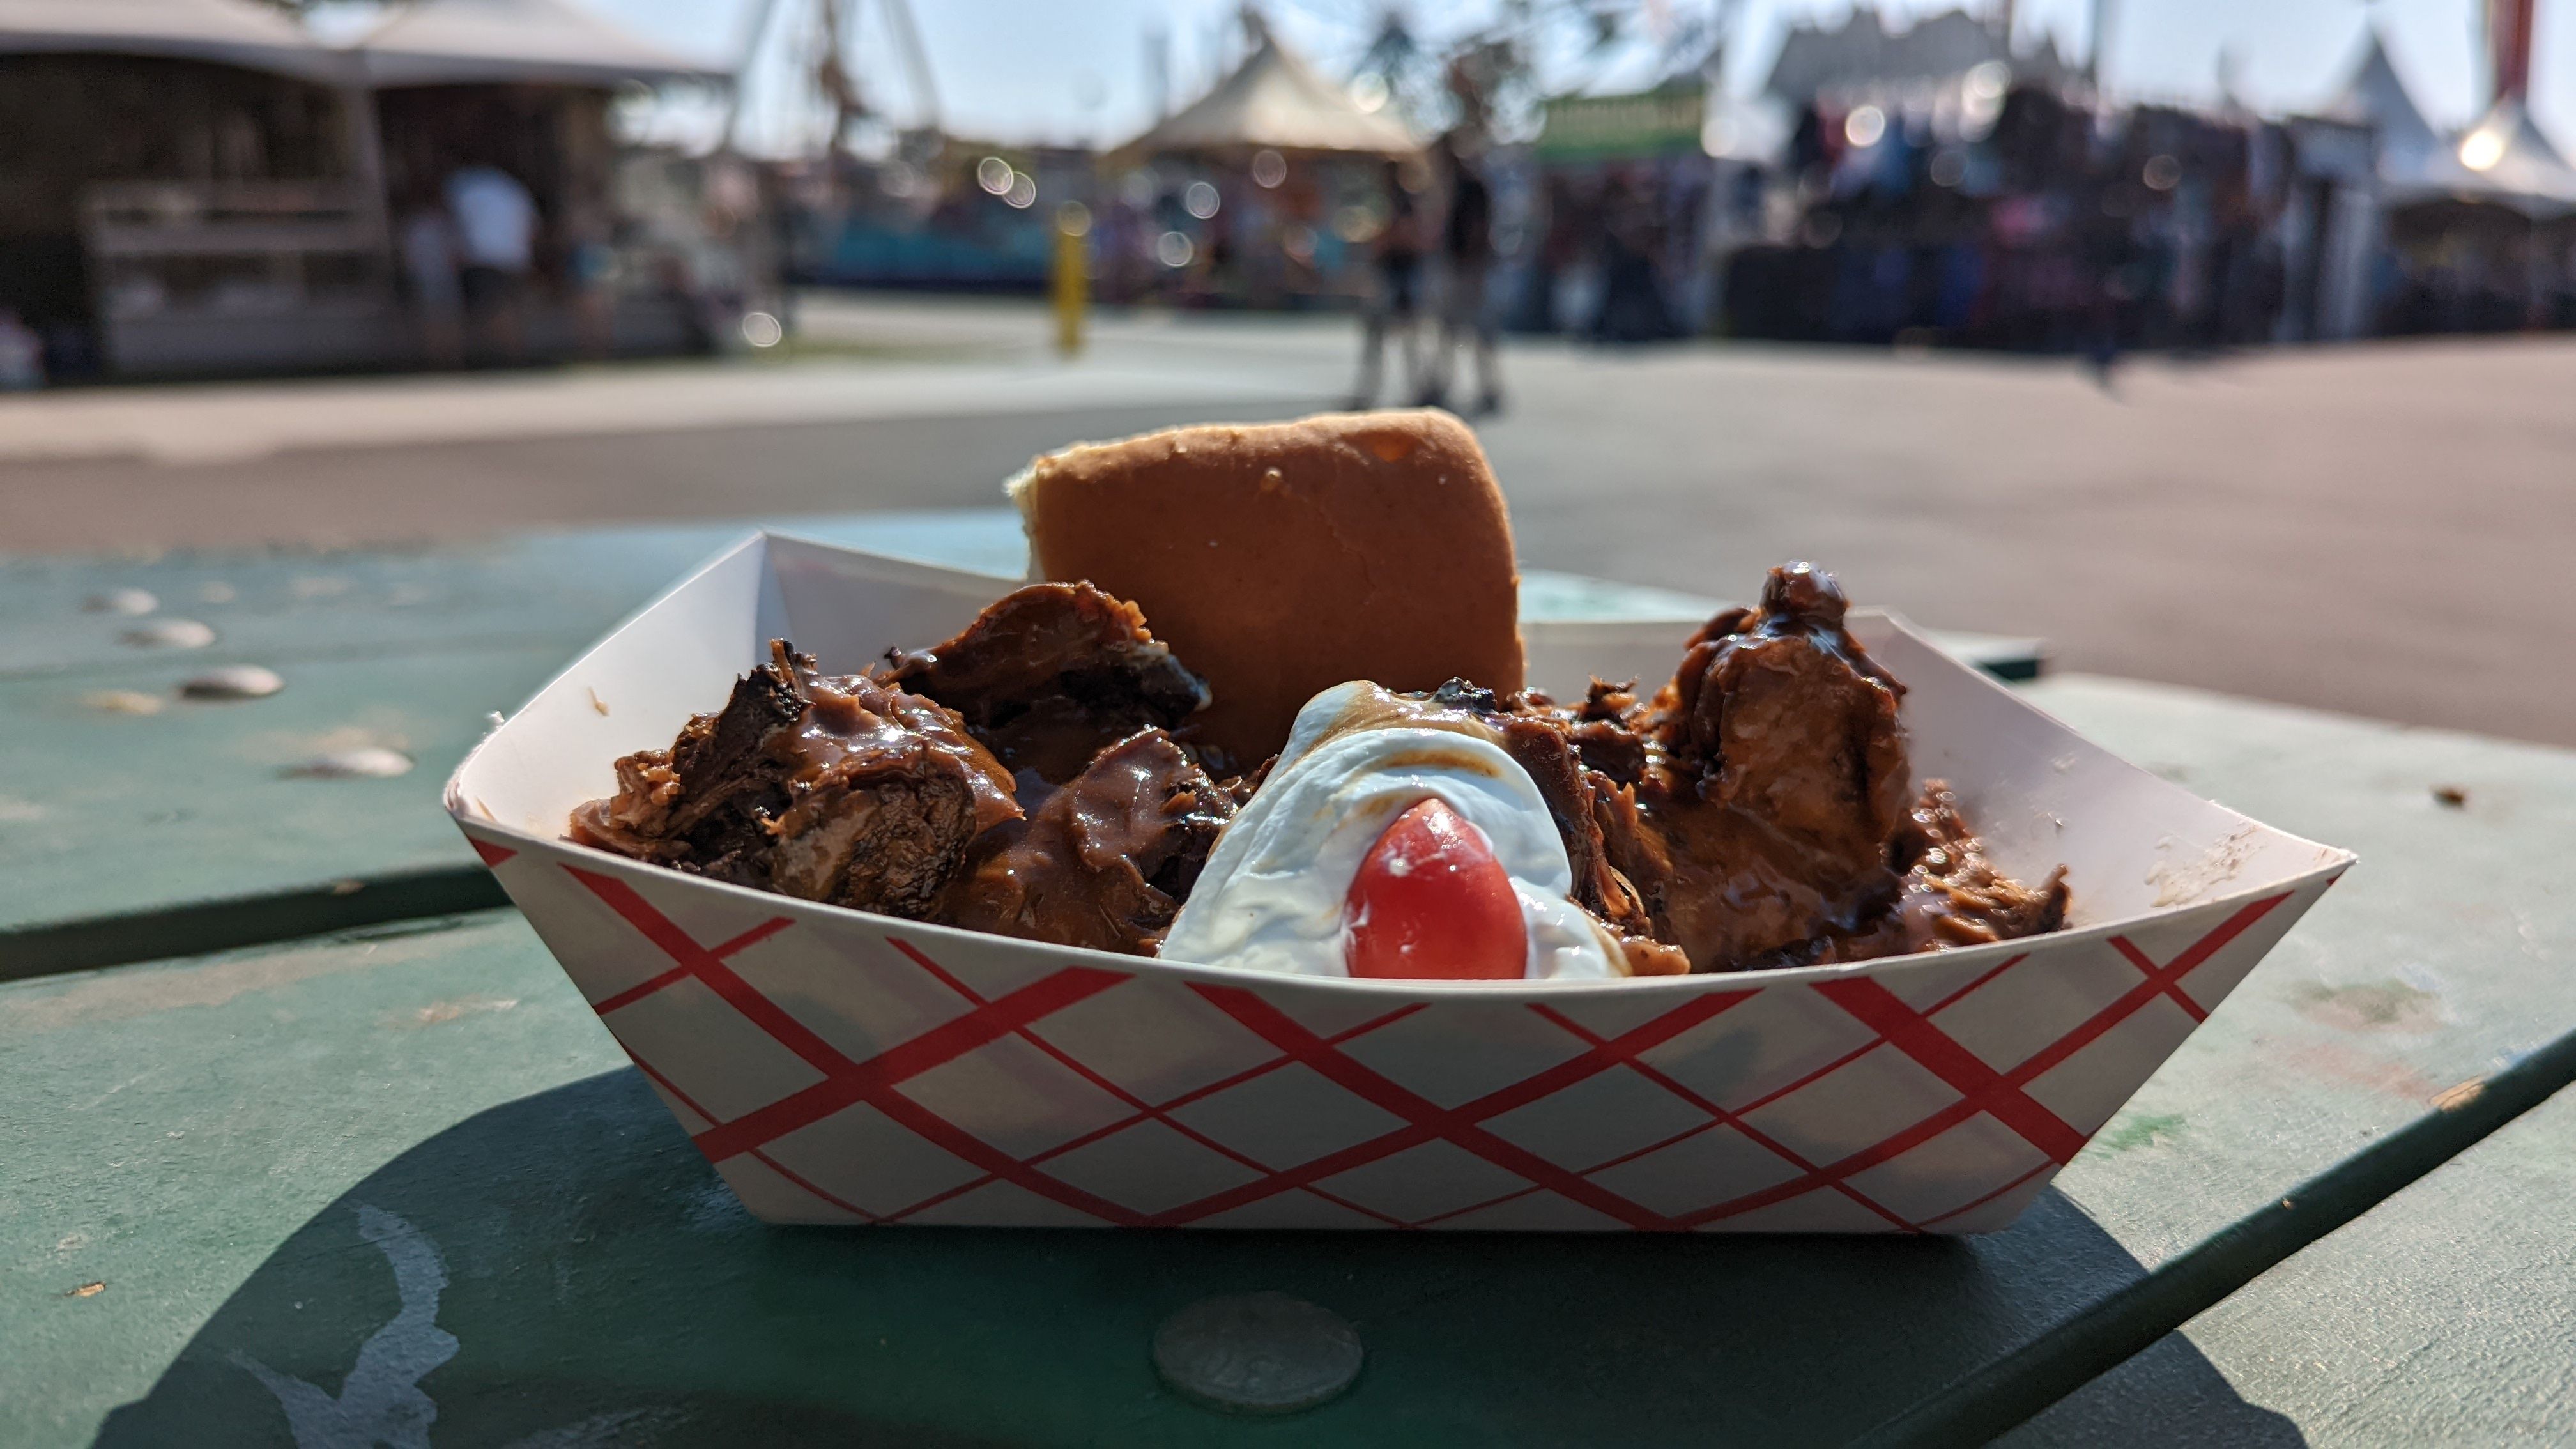 Stewed beef, sour cream, a cherry tomato and a dinner roll make a hot beef sundae at the Utah State Fair. 